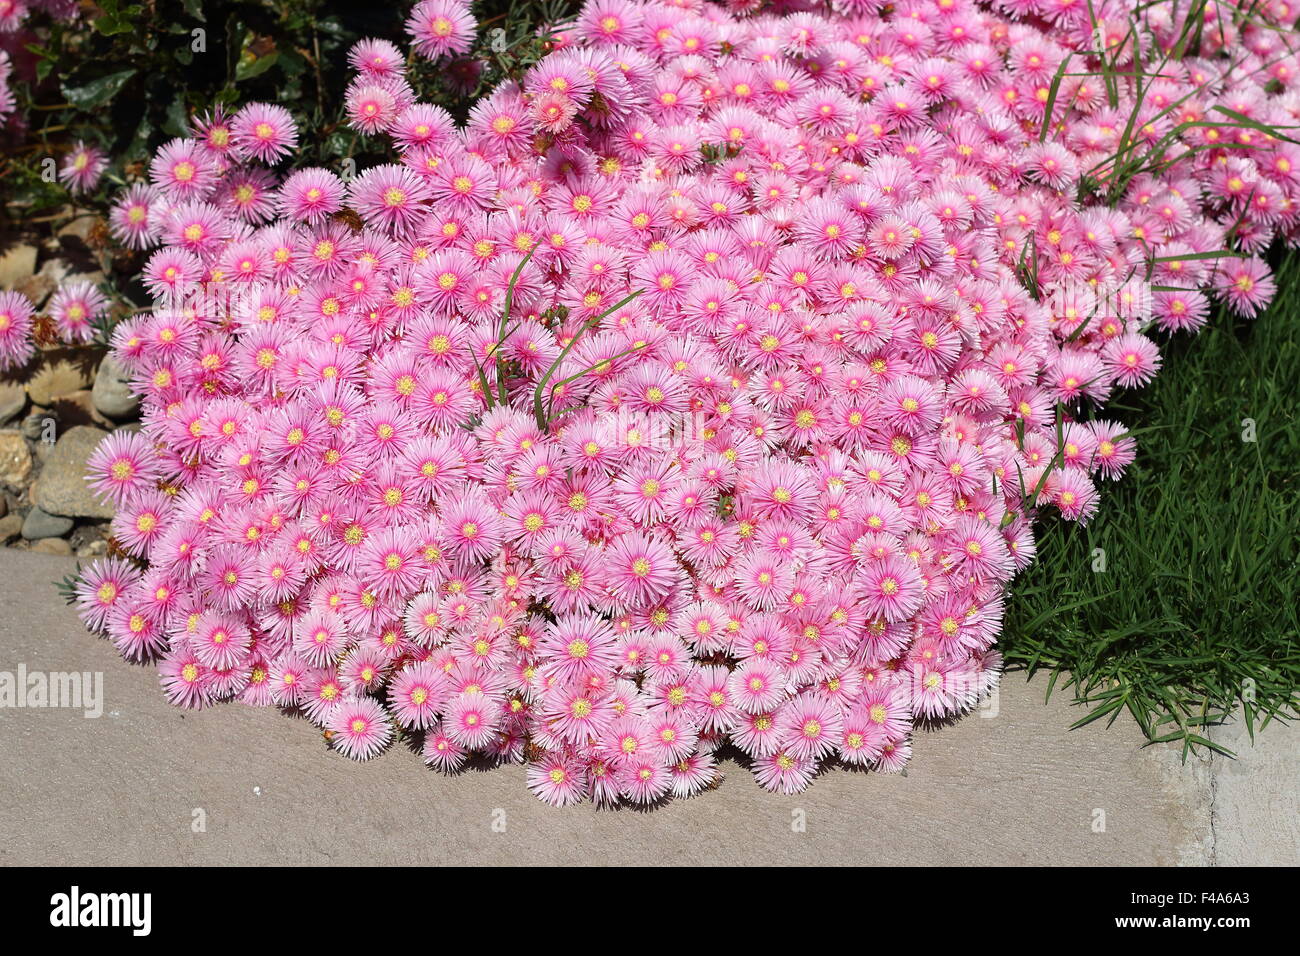 Pink Pig face flowers or Mesembryanthemum , ice plant flowers in full bloom Stock Photo